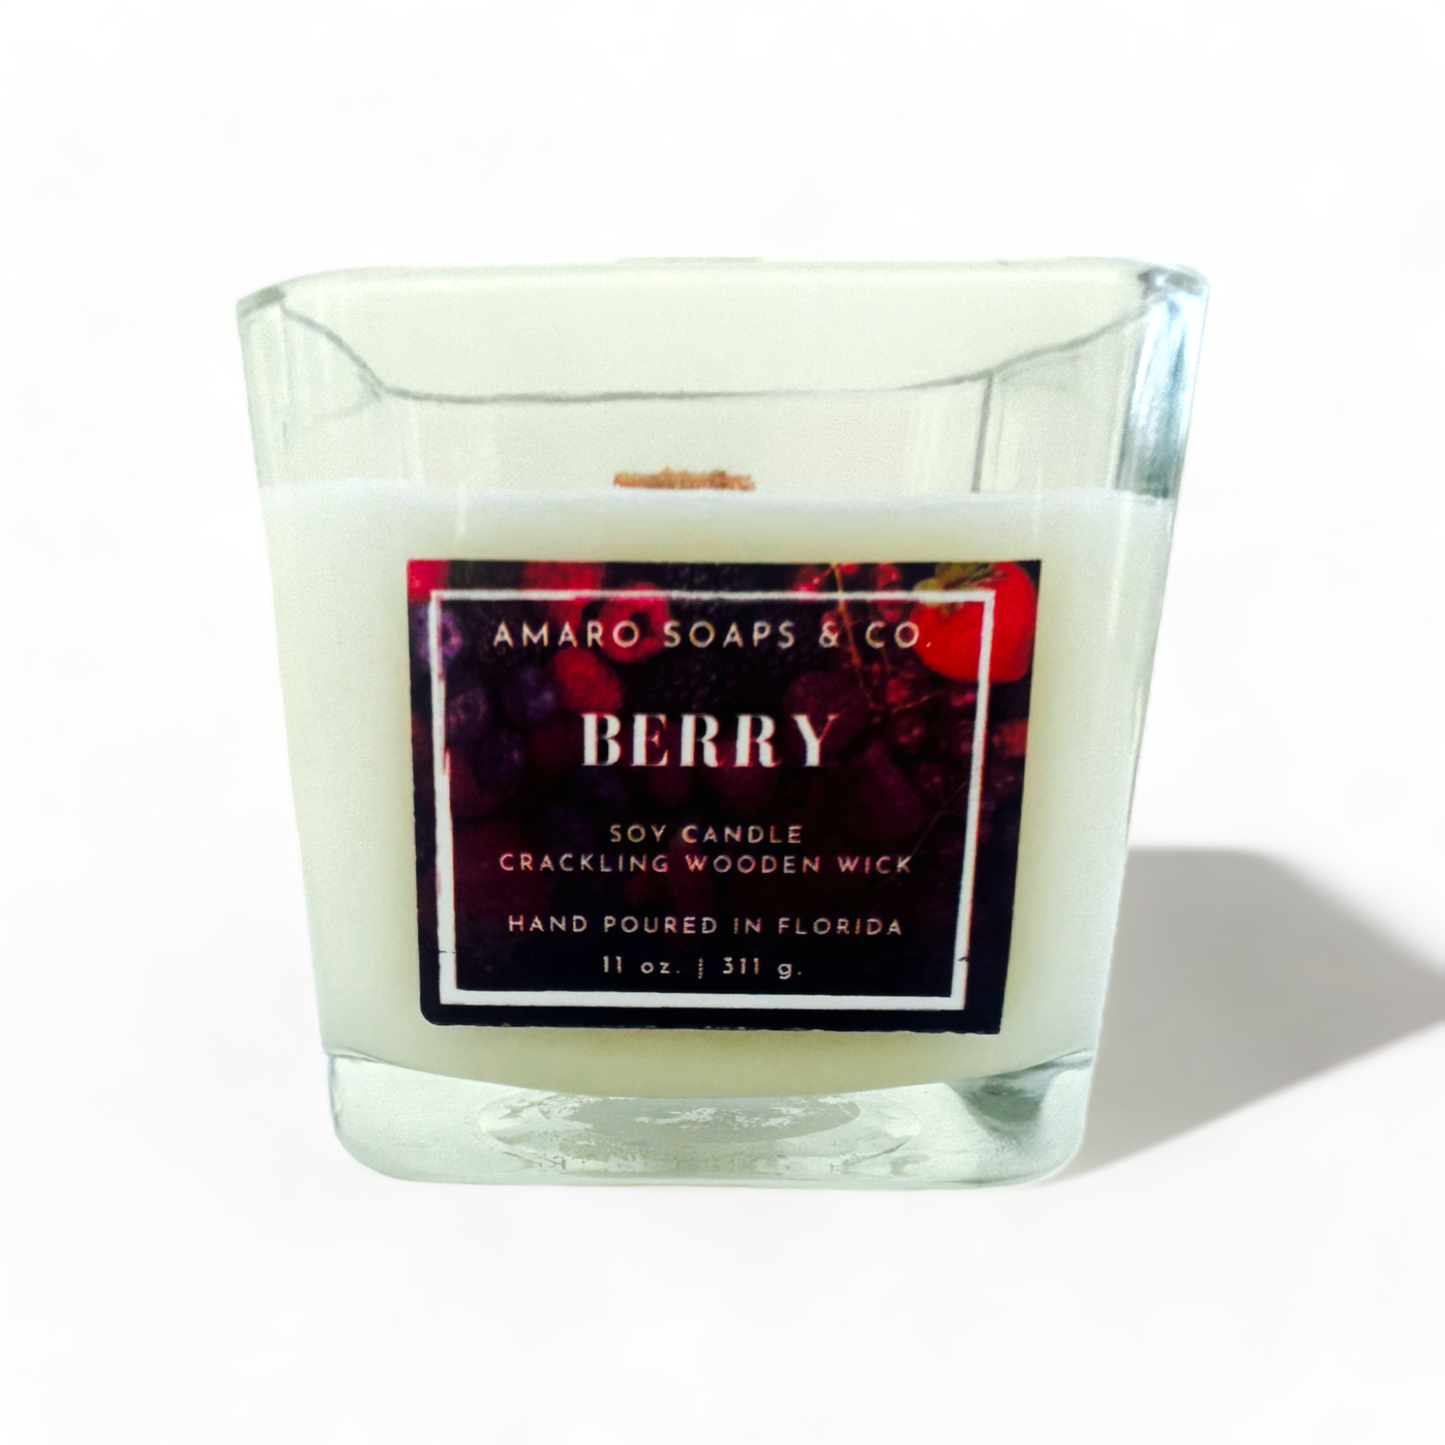 Berry Wooden Wick Soy Candle